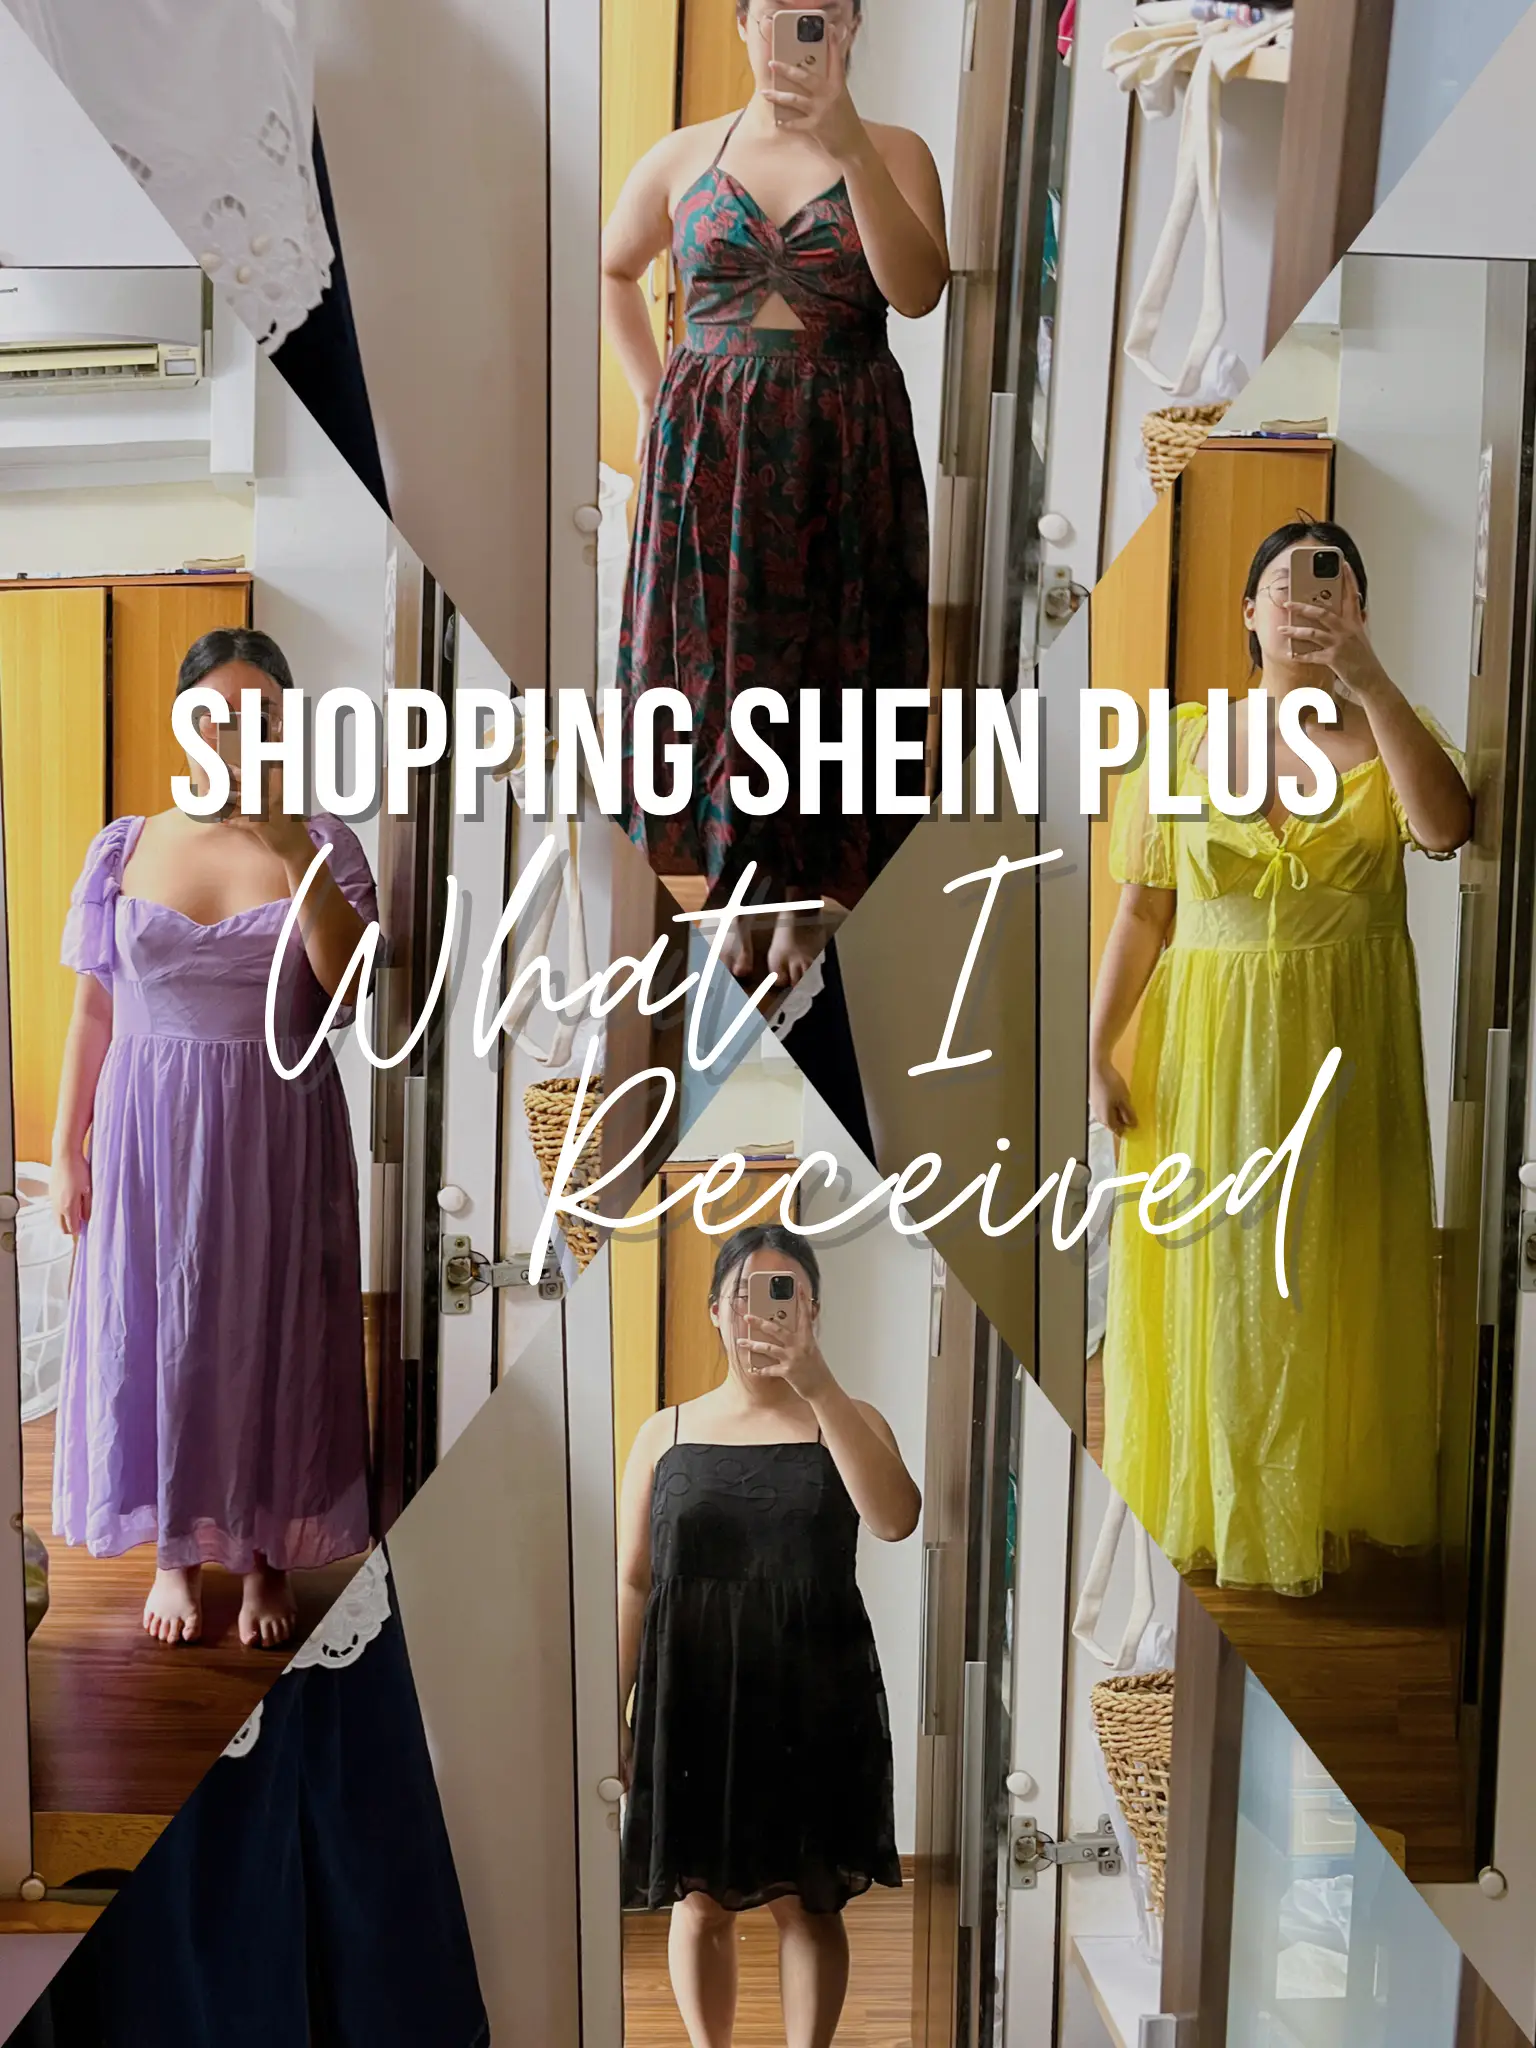 Shein Plus Size Dresses Try On Haul